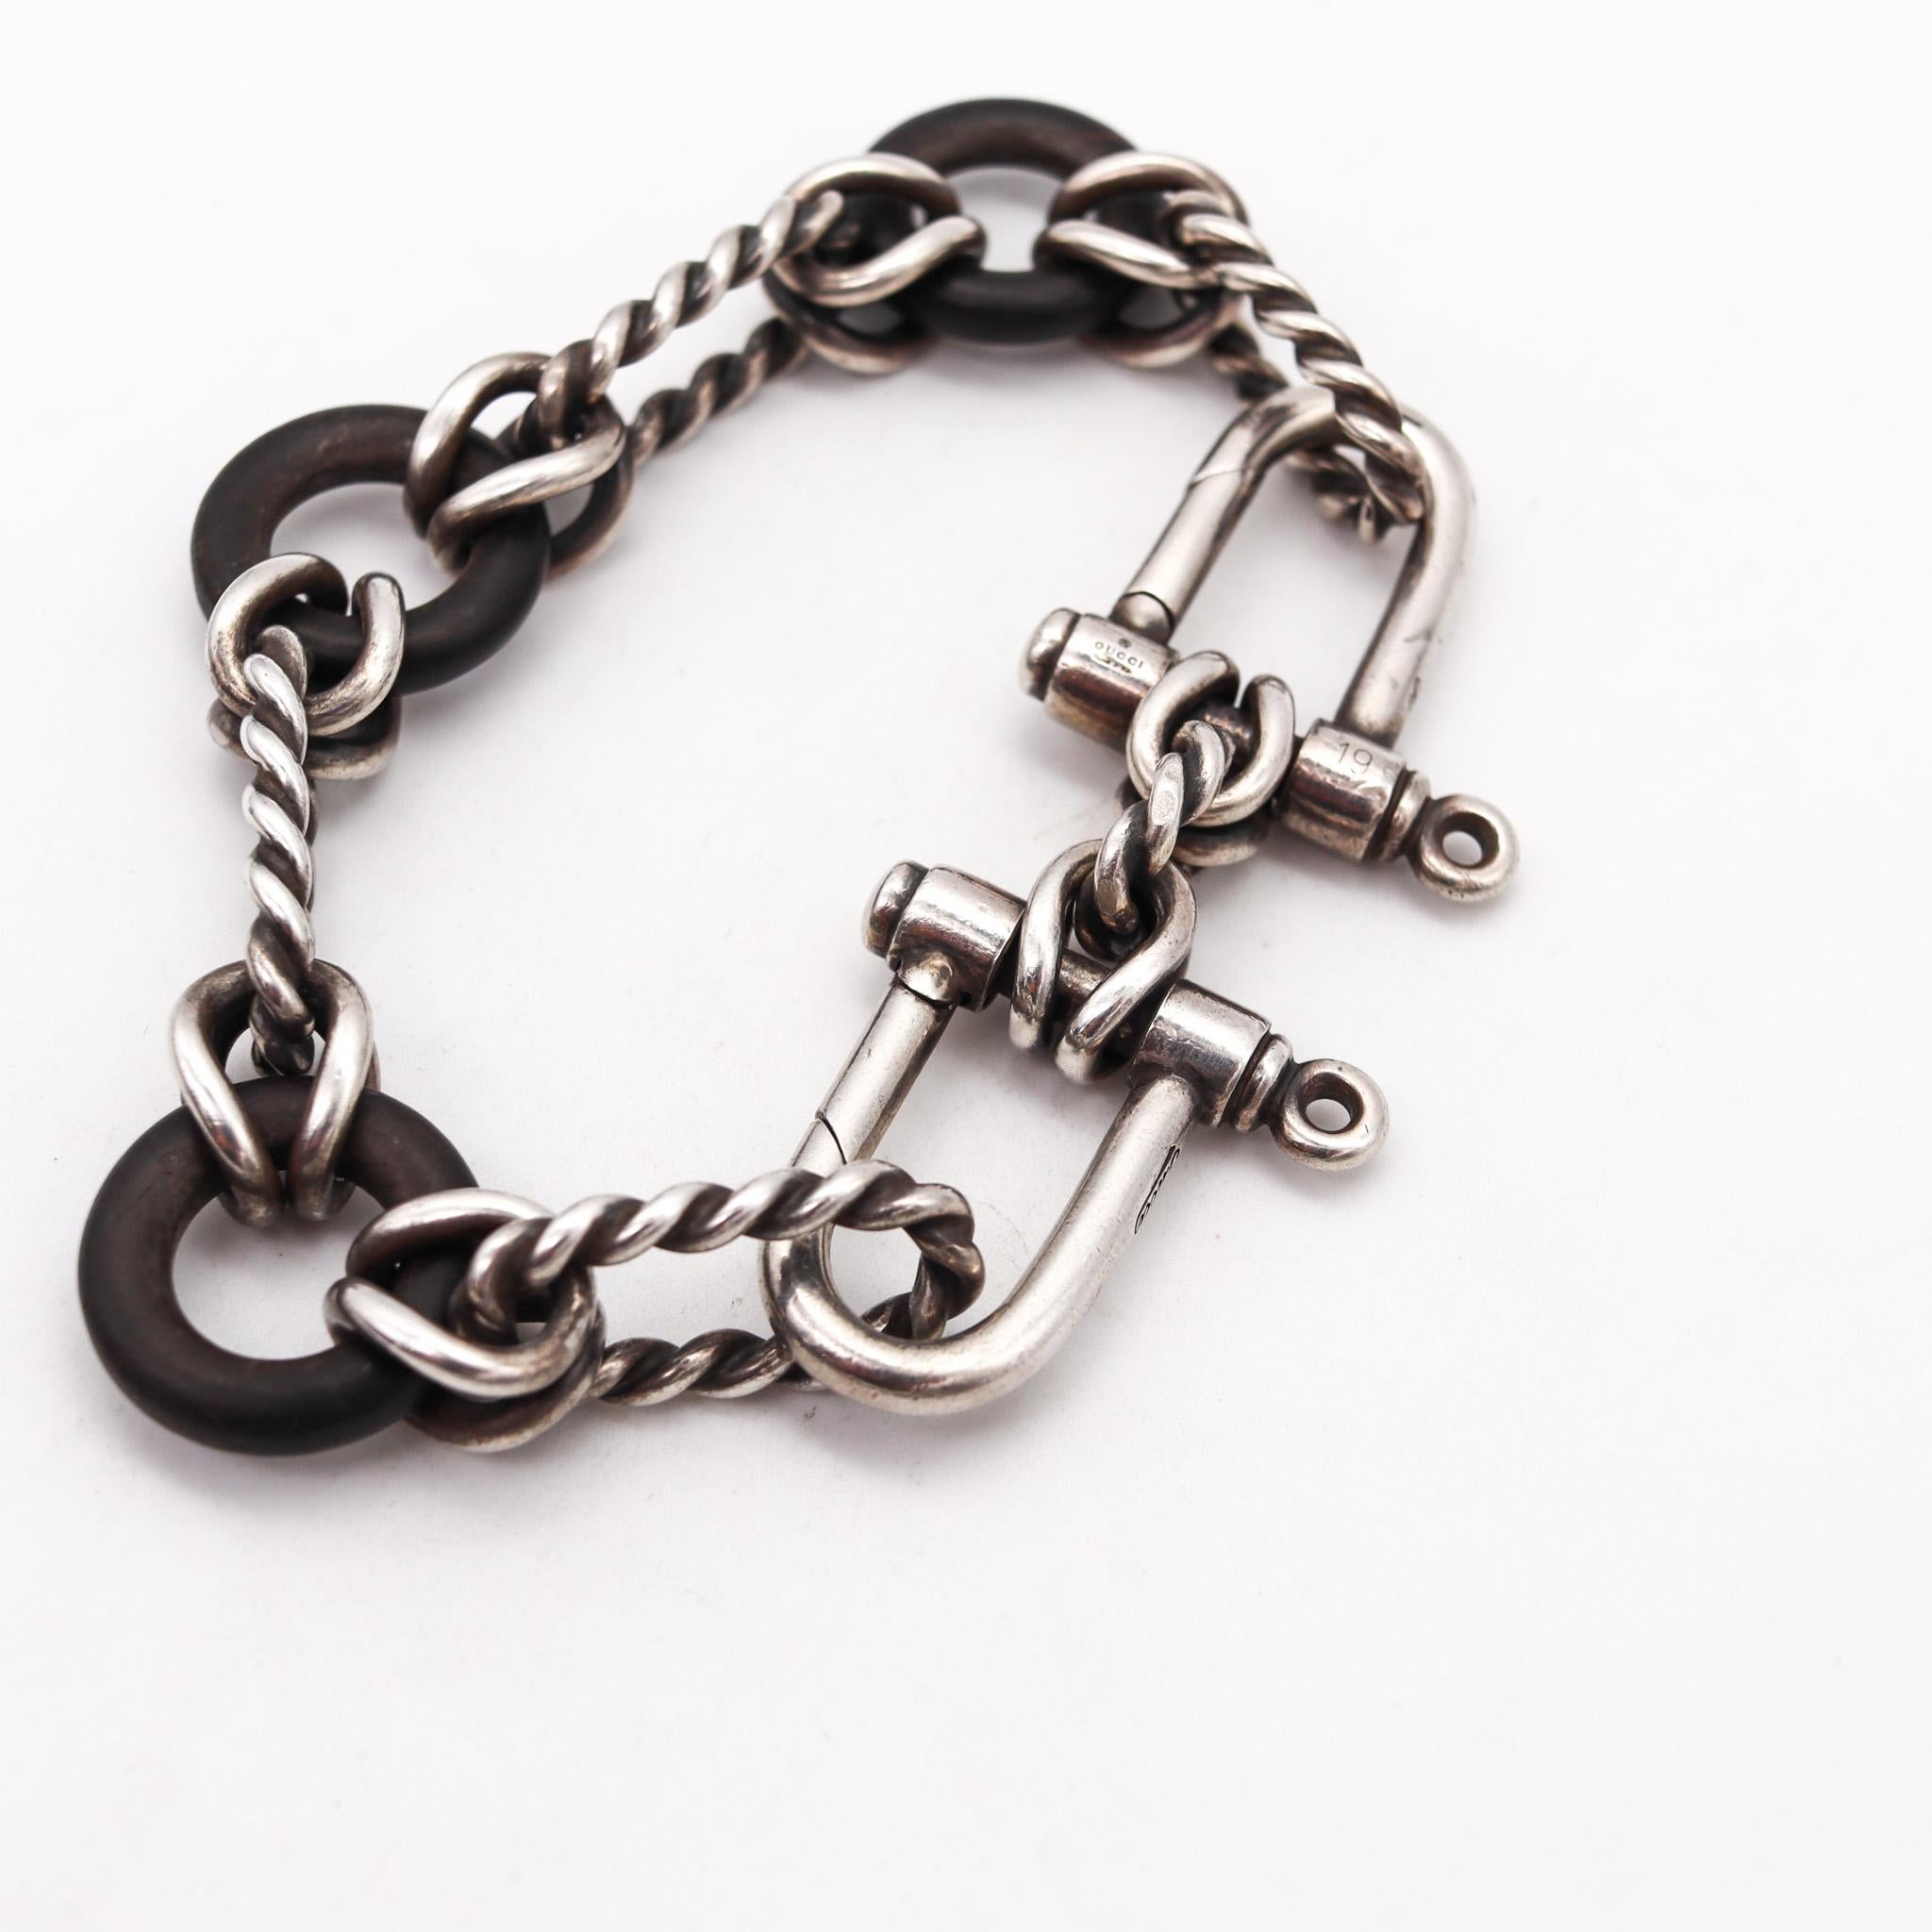 A twisted links bracelet designed by Gucci.

Gorgeous vintage piece, created in Florence Italy by the fashion house of Gucci, back in the 1970. This bold and massive links bracelet is very rare and has been carefully crafted in solid .925/.999